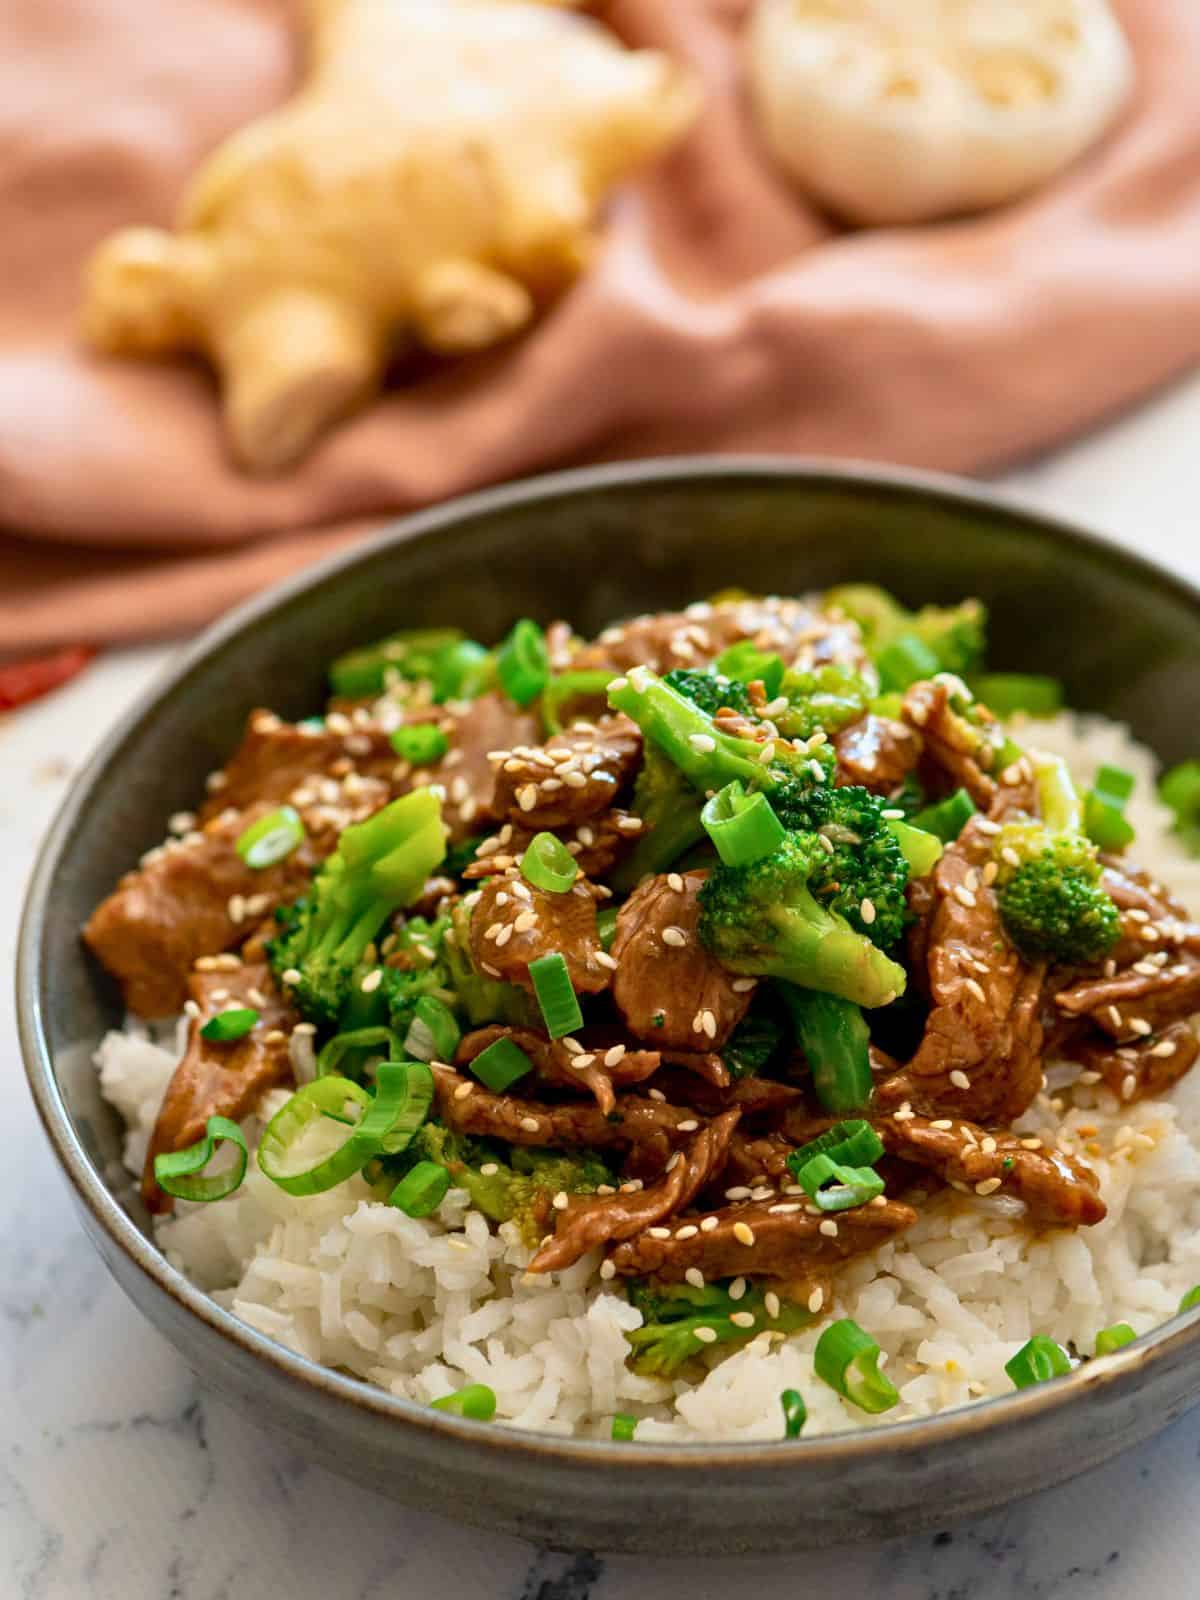 Instant Pot Beef and Broccoli served over white rice and topped with sesame seeds and sliced green onions.